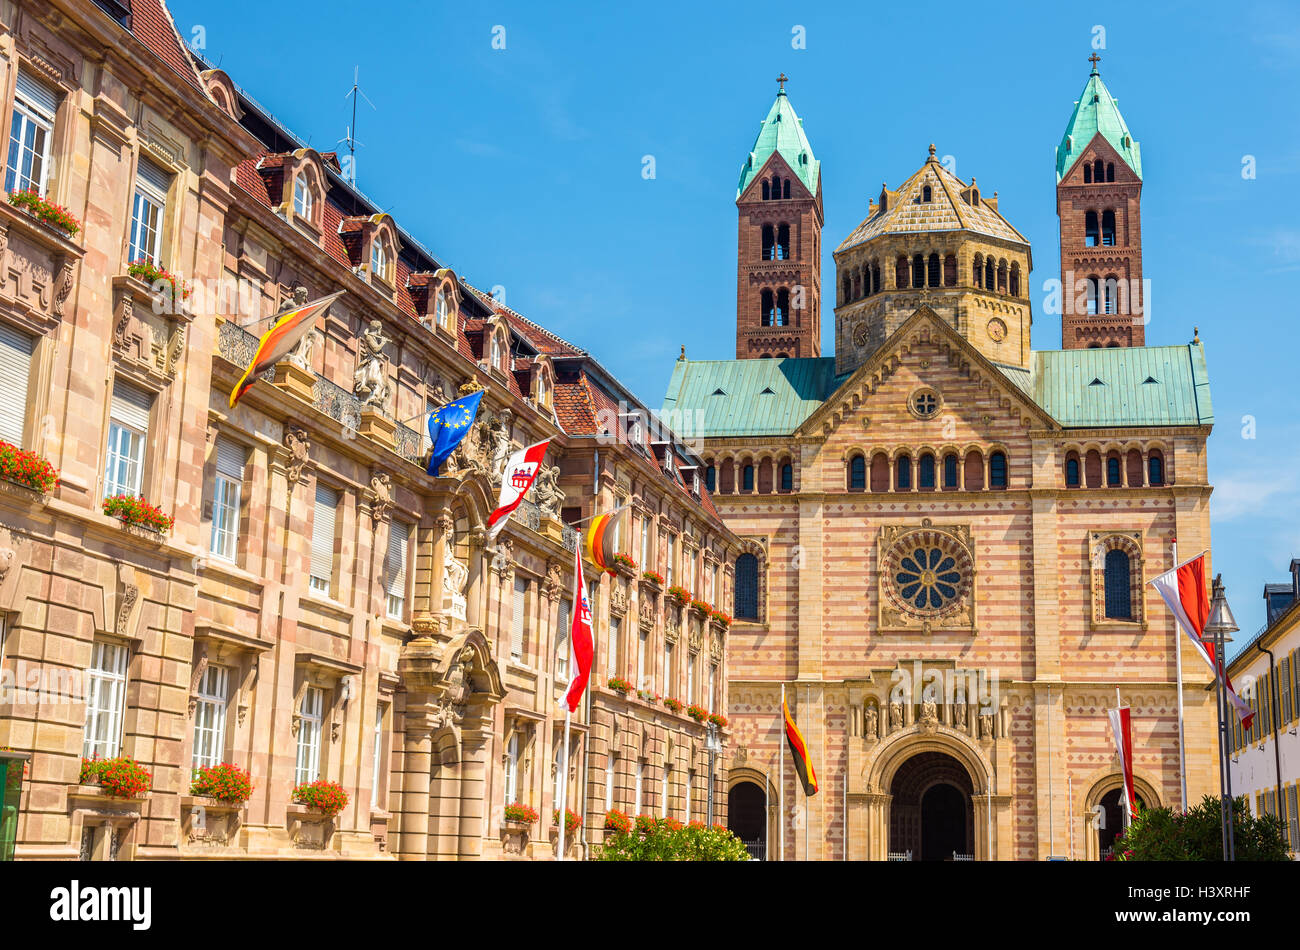 The city hall and the Cathedral of Speyer - Germany Stock Photo